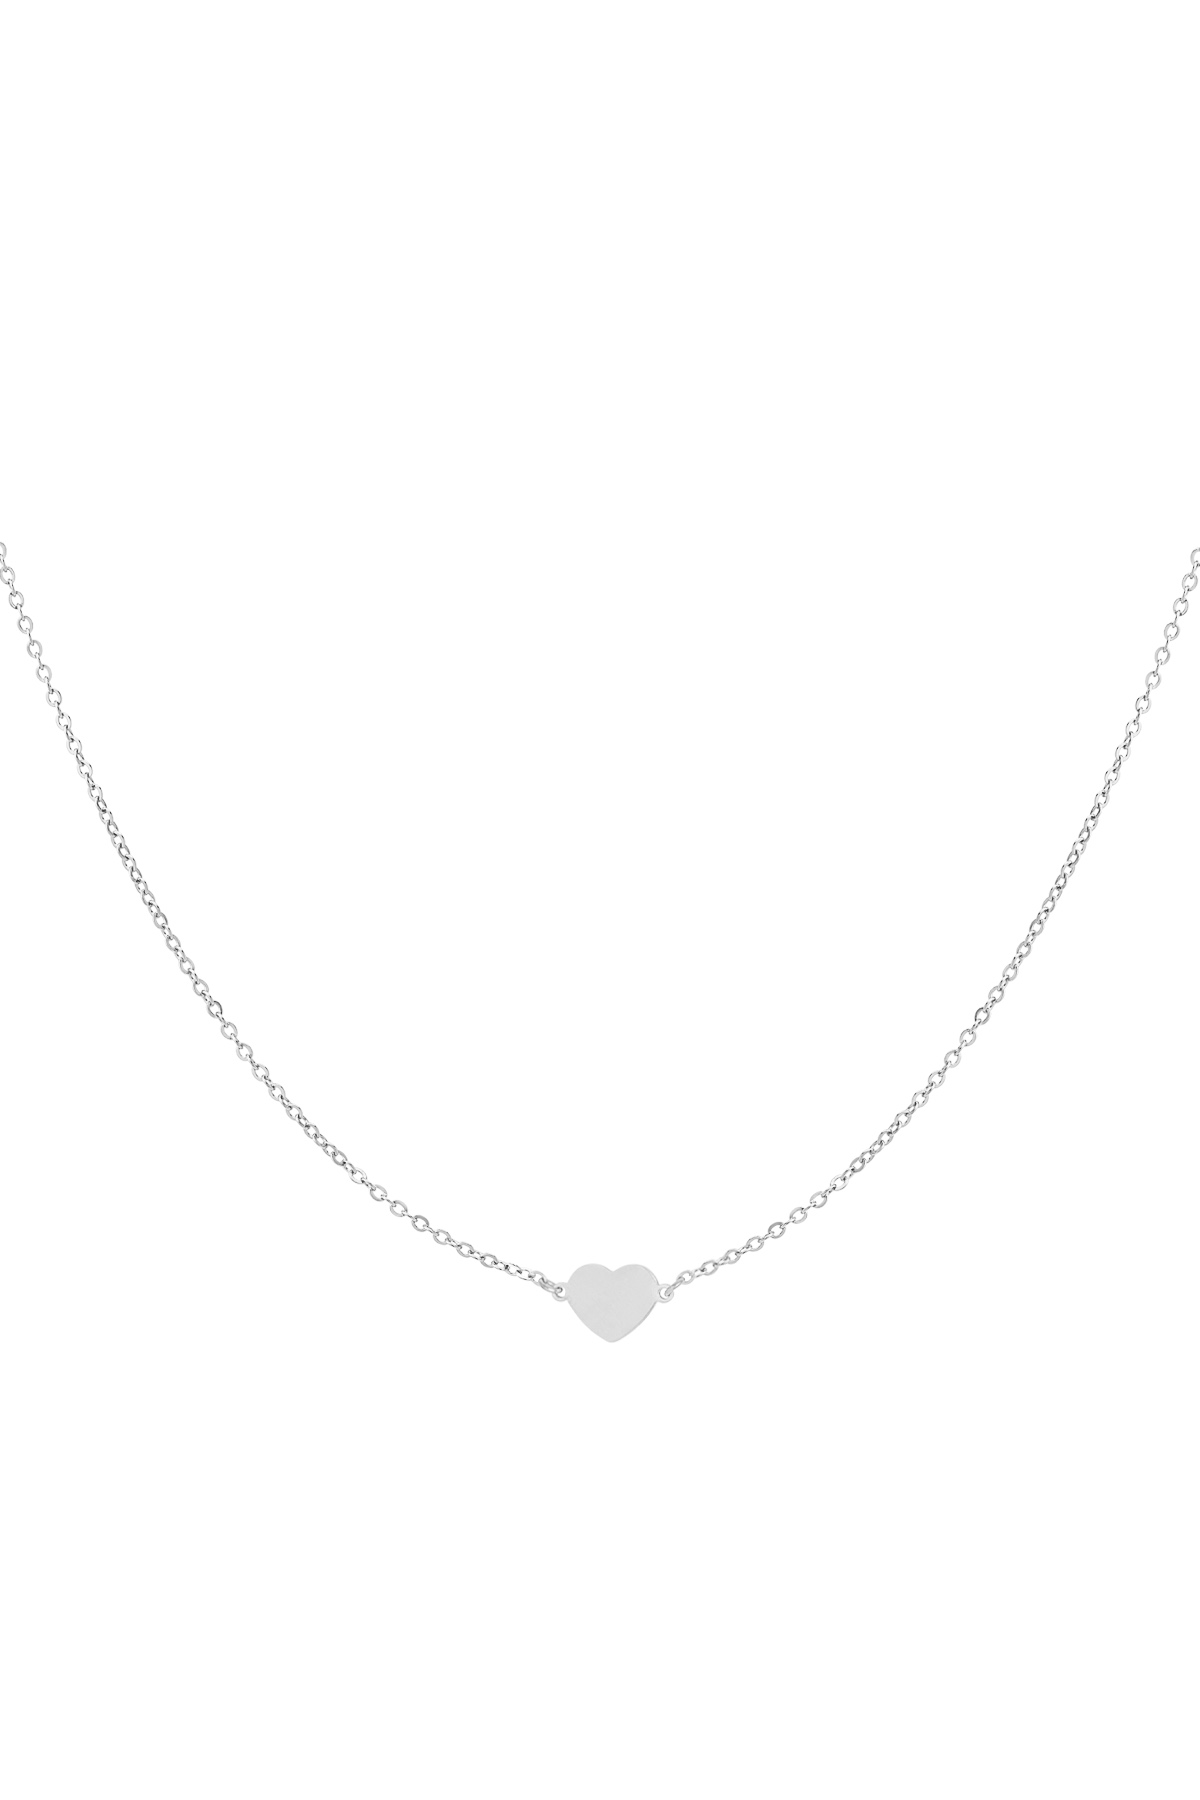 Necklace forever bond - silver h5 Picture3